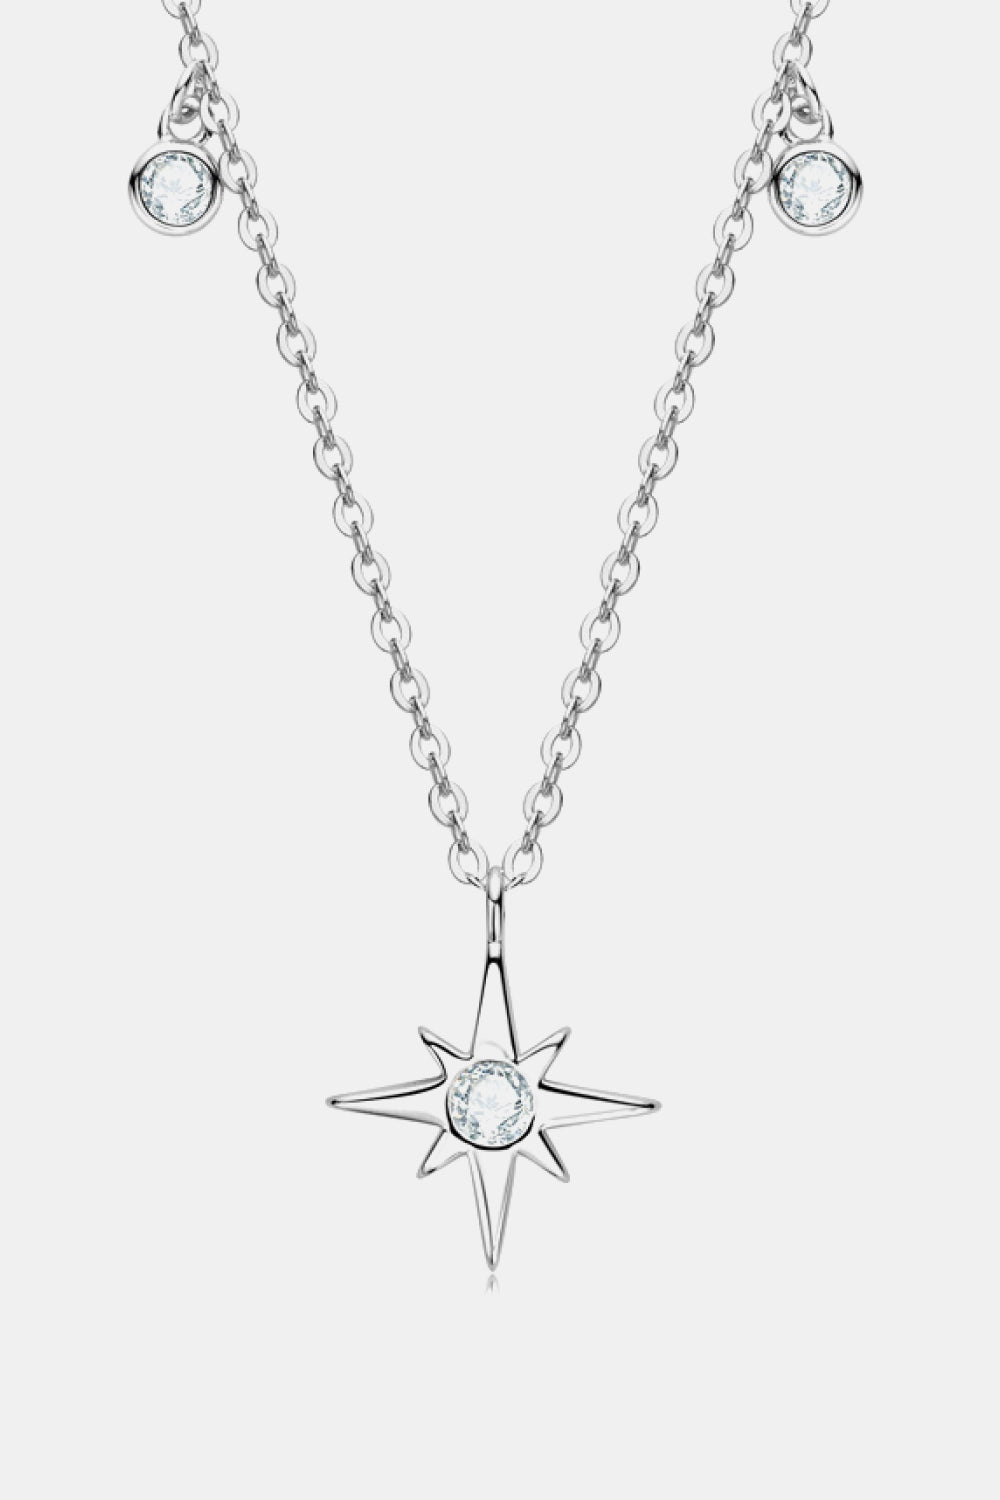 .2 Carat Moissanite North Star Pendant 925 Sterling Silver Necklace